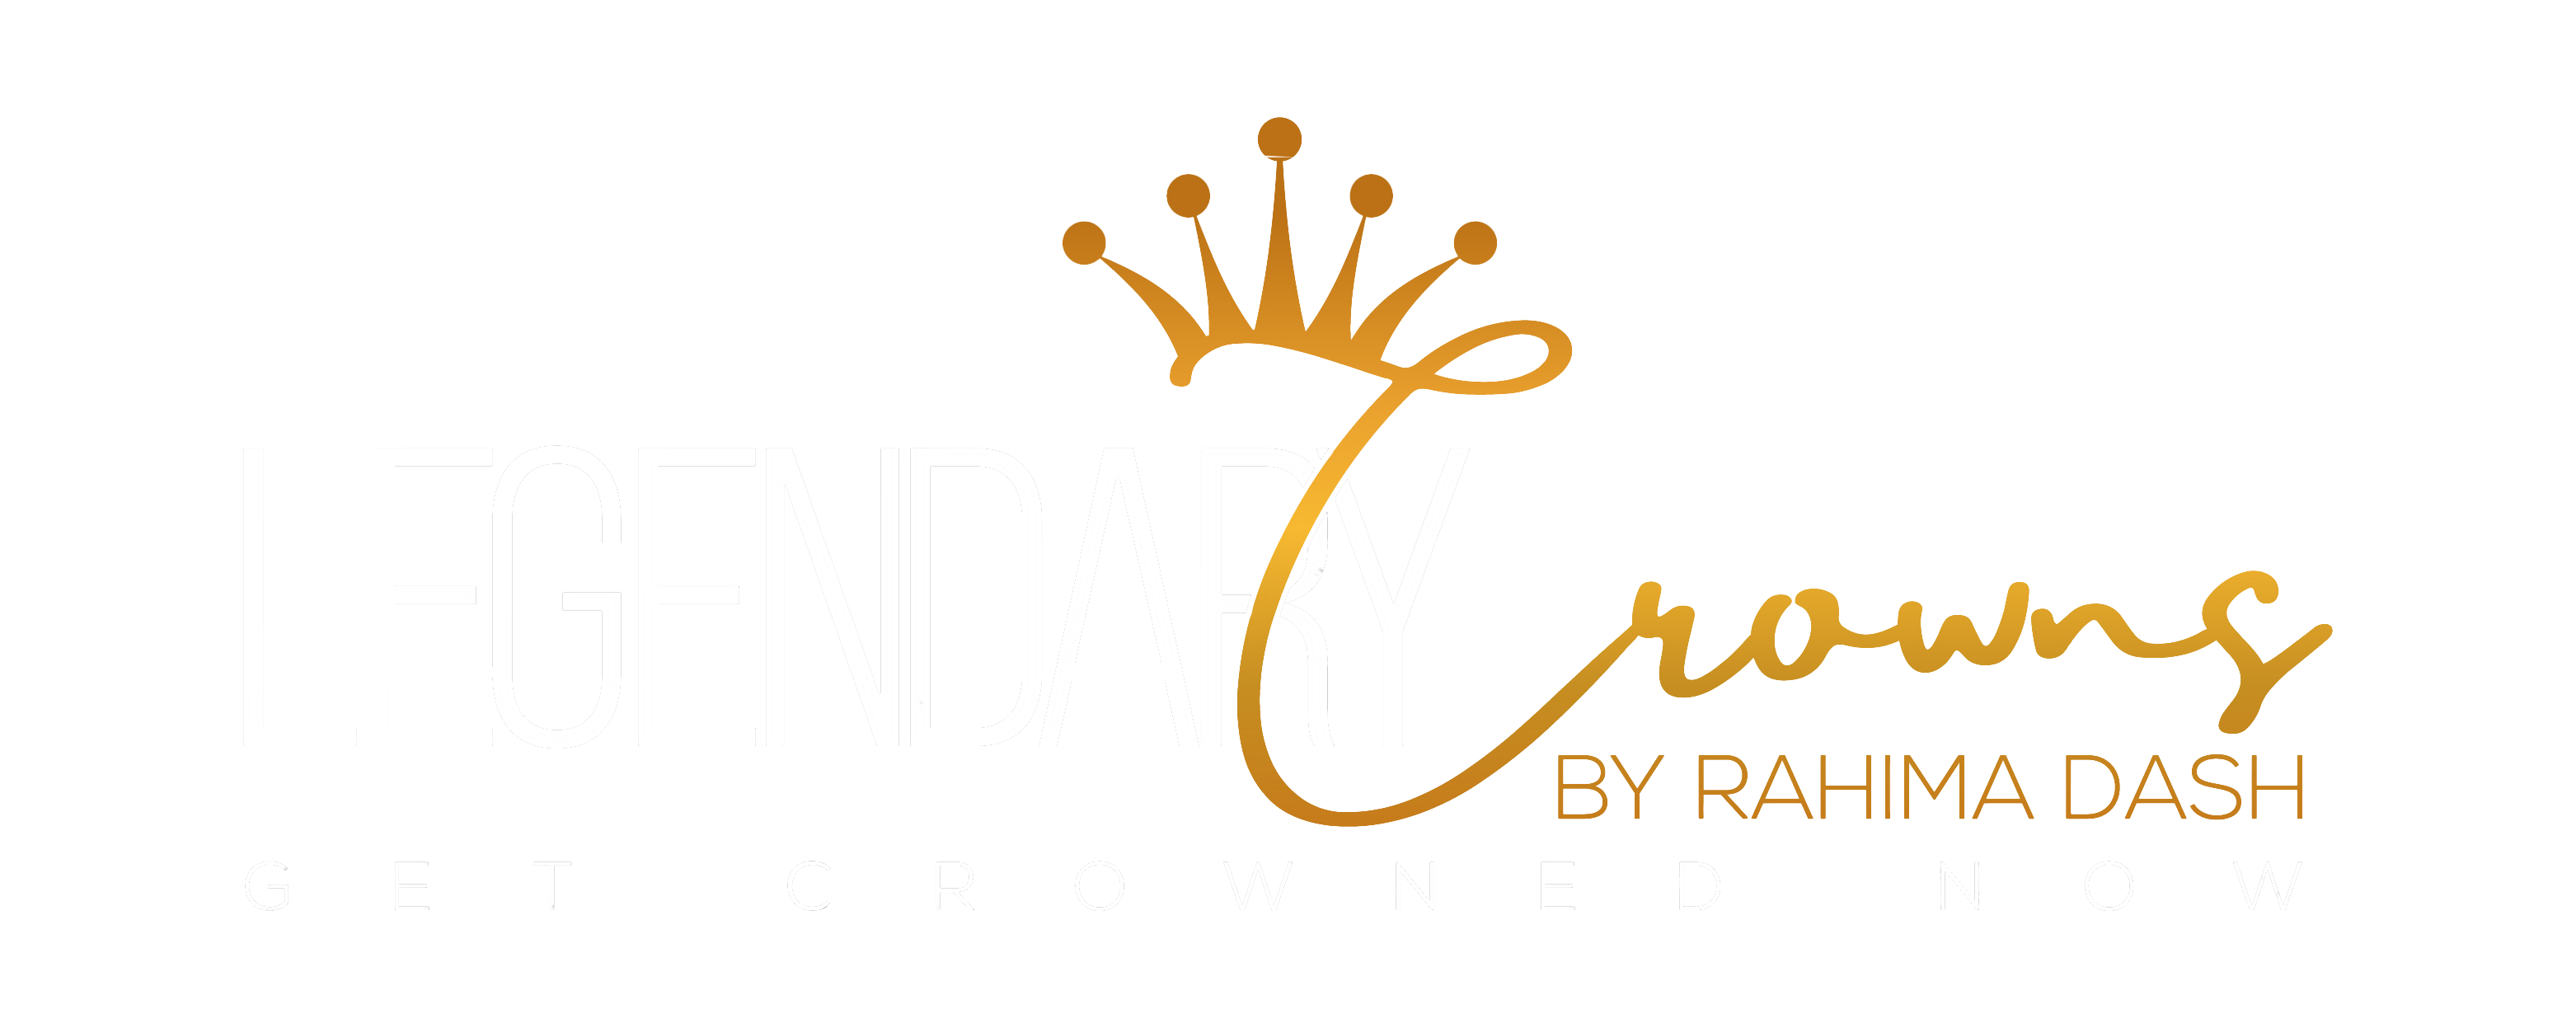 Legendary Crowns Collection LLC